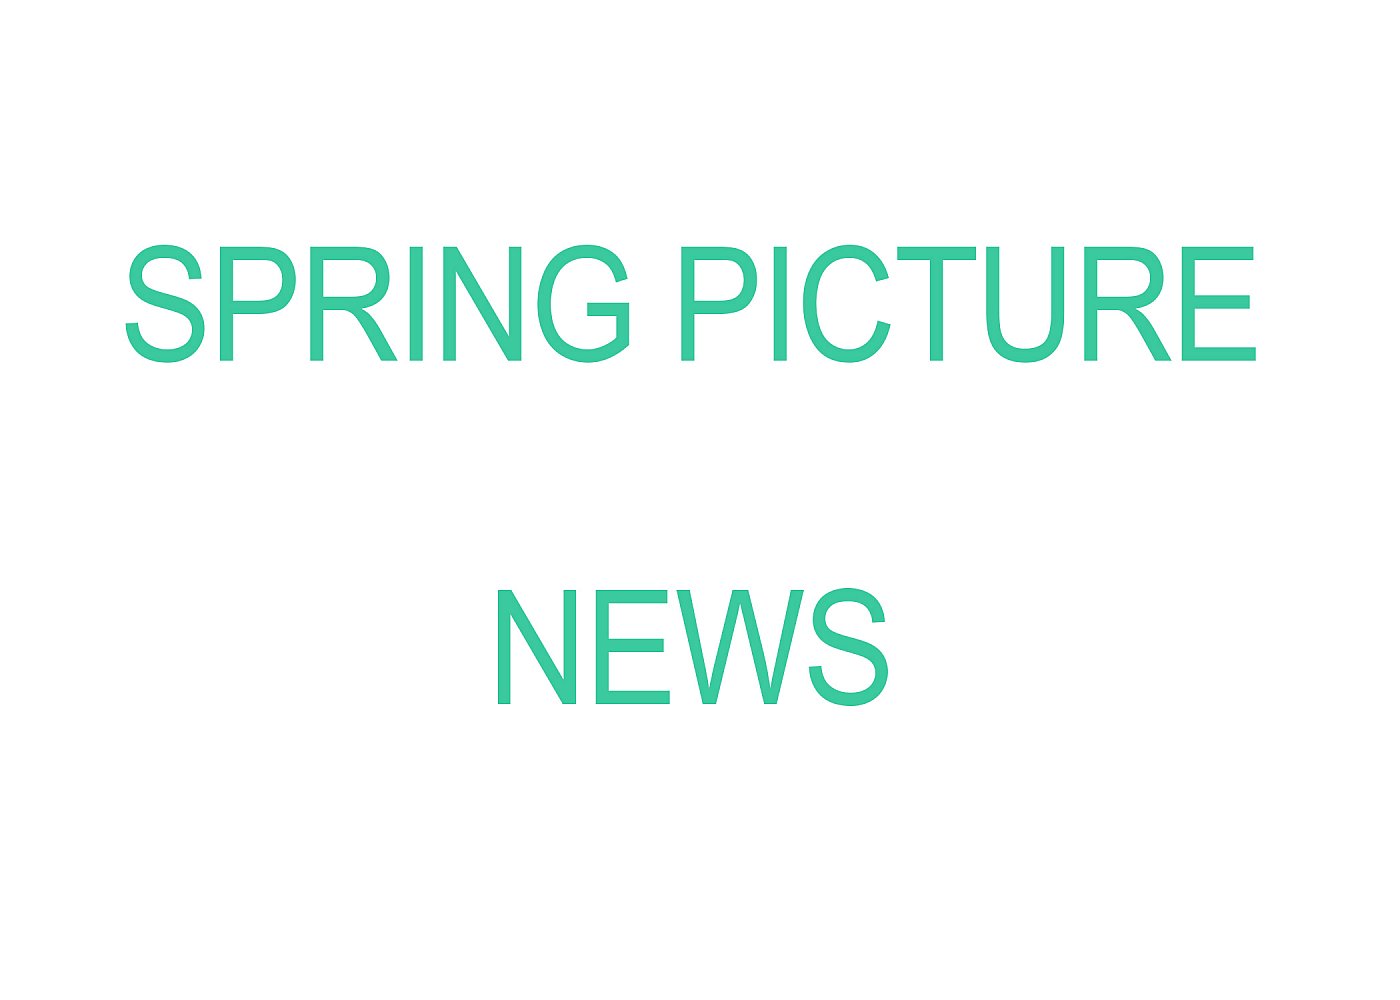 SPRING PICTURE NEWS.jpg